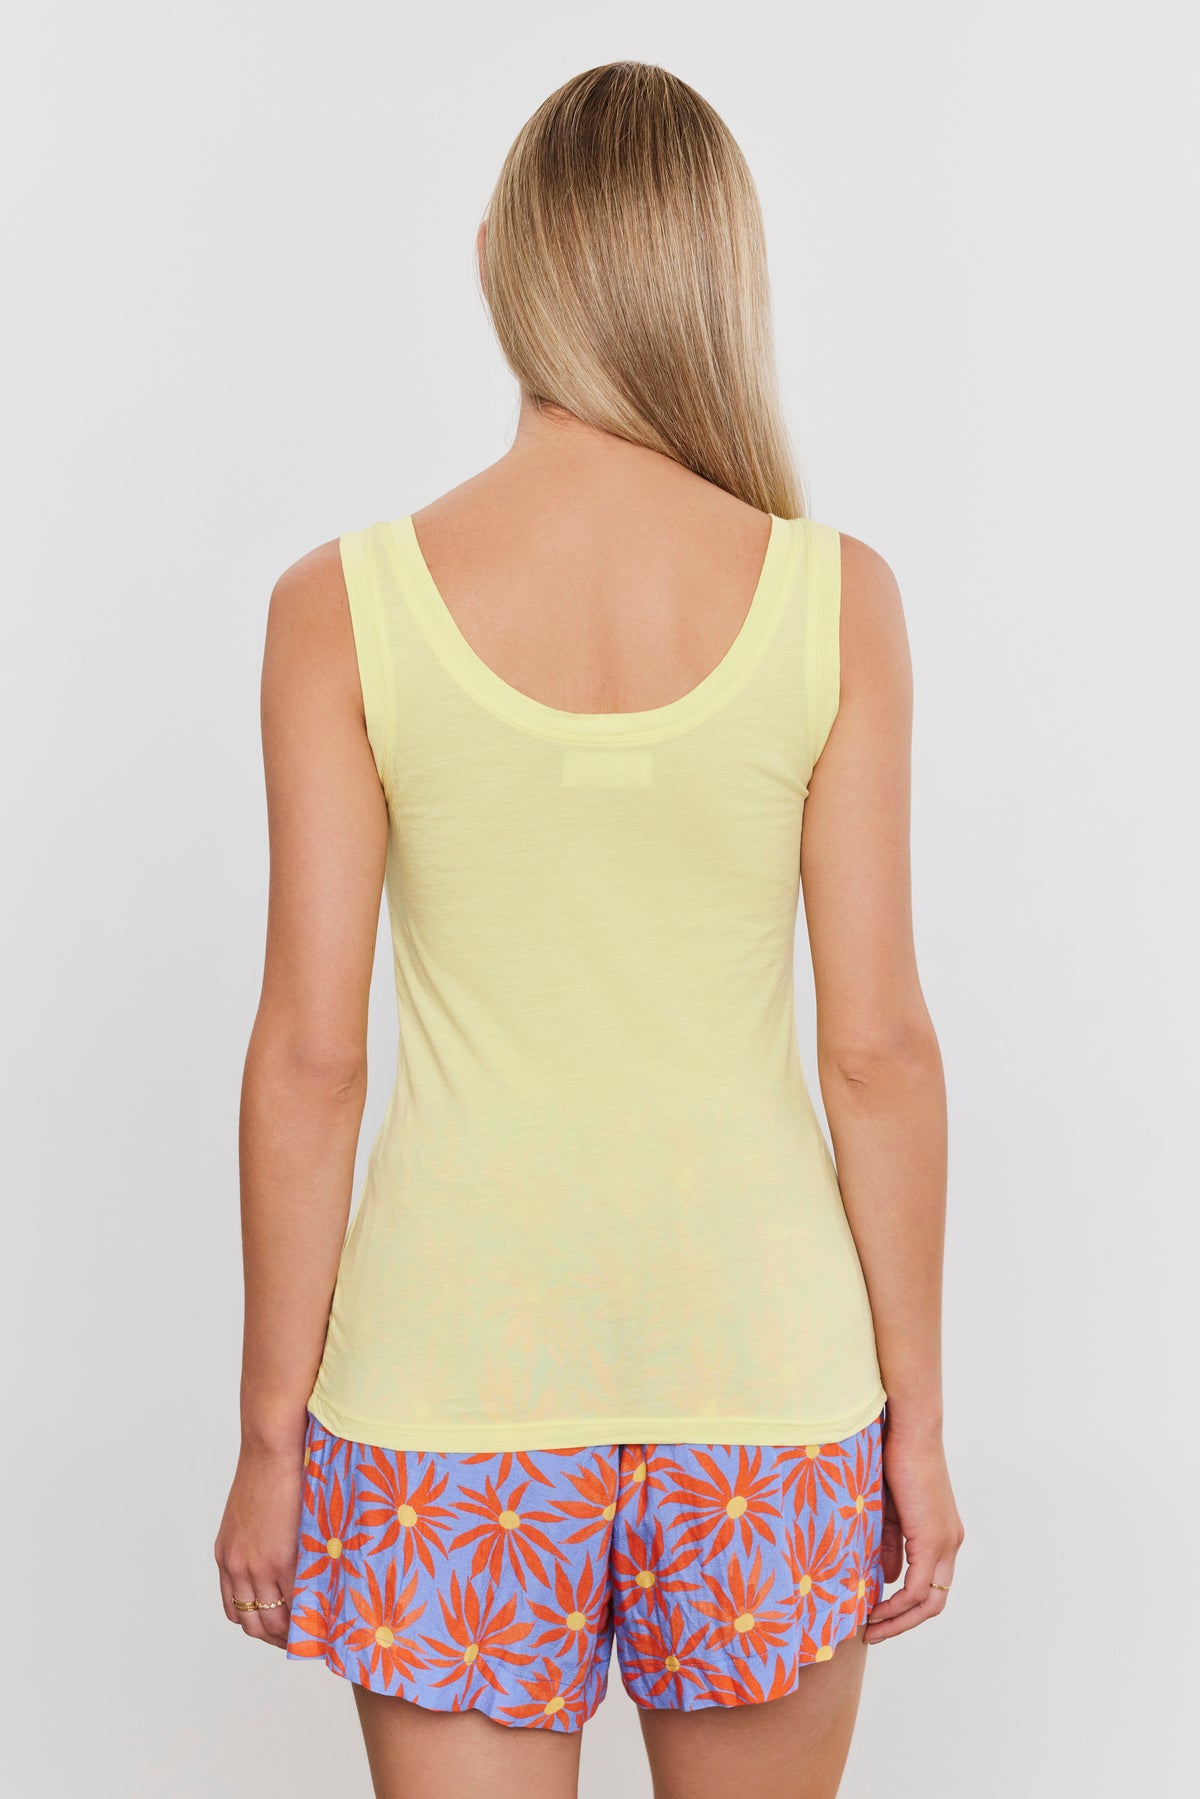 A woman seen from behind, wearing a Velvet by Graham & Spencer MOSSY GAUZY WHISPER FITTED TANK and colorful shorts with a leaf pattern.-36910237581505